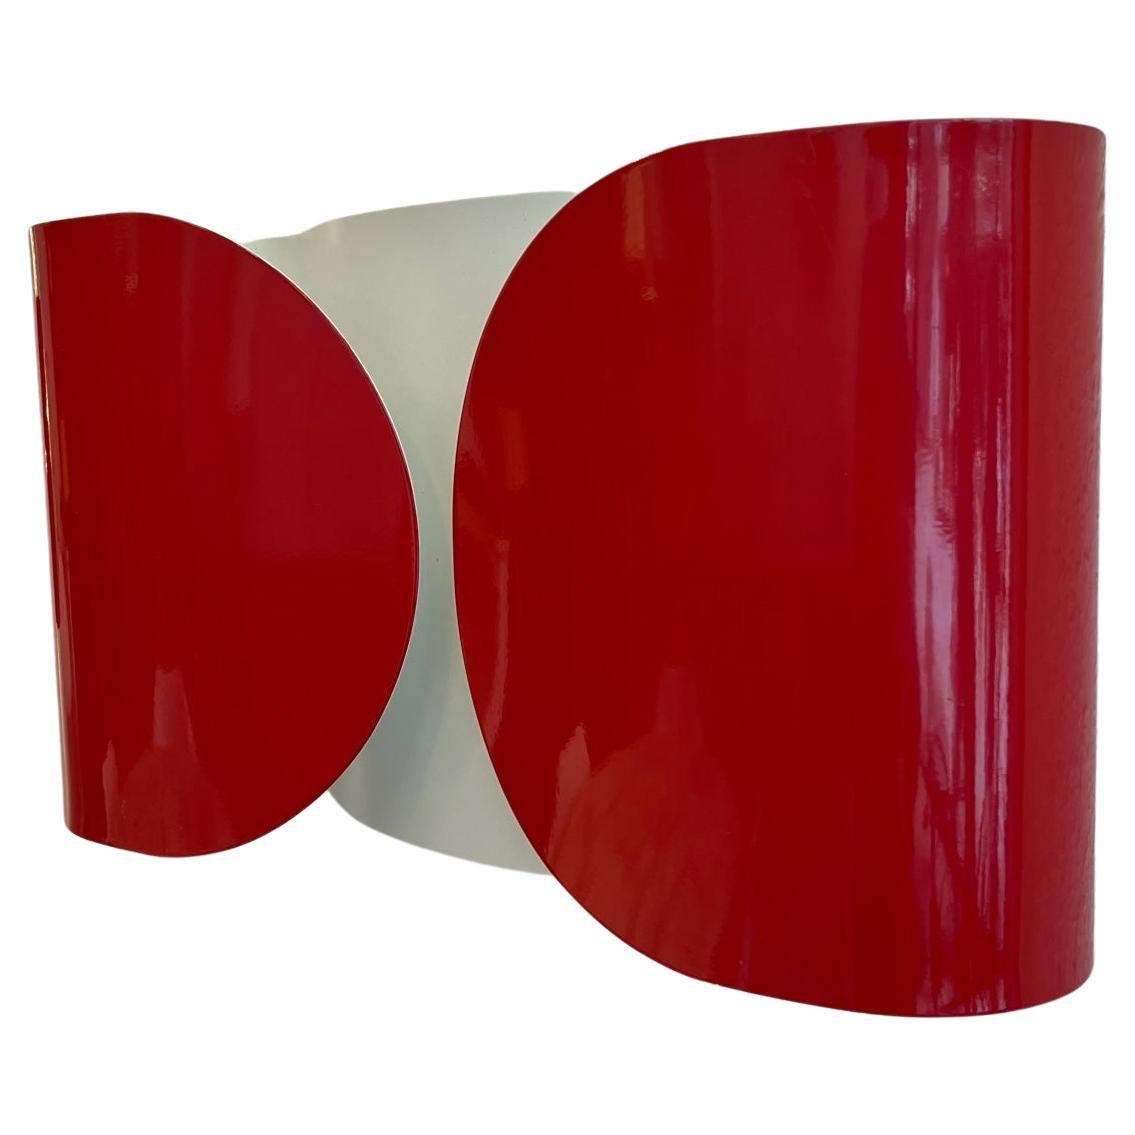 Vintage Rare Set of 3 Red Foglio Wall Lamps by Tobia Scarpa for Flos circa 1970s